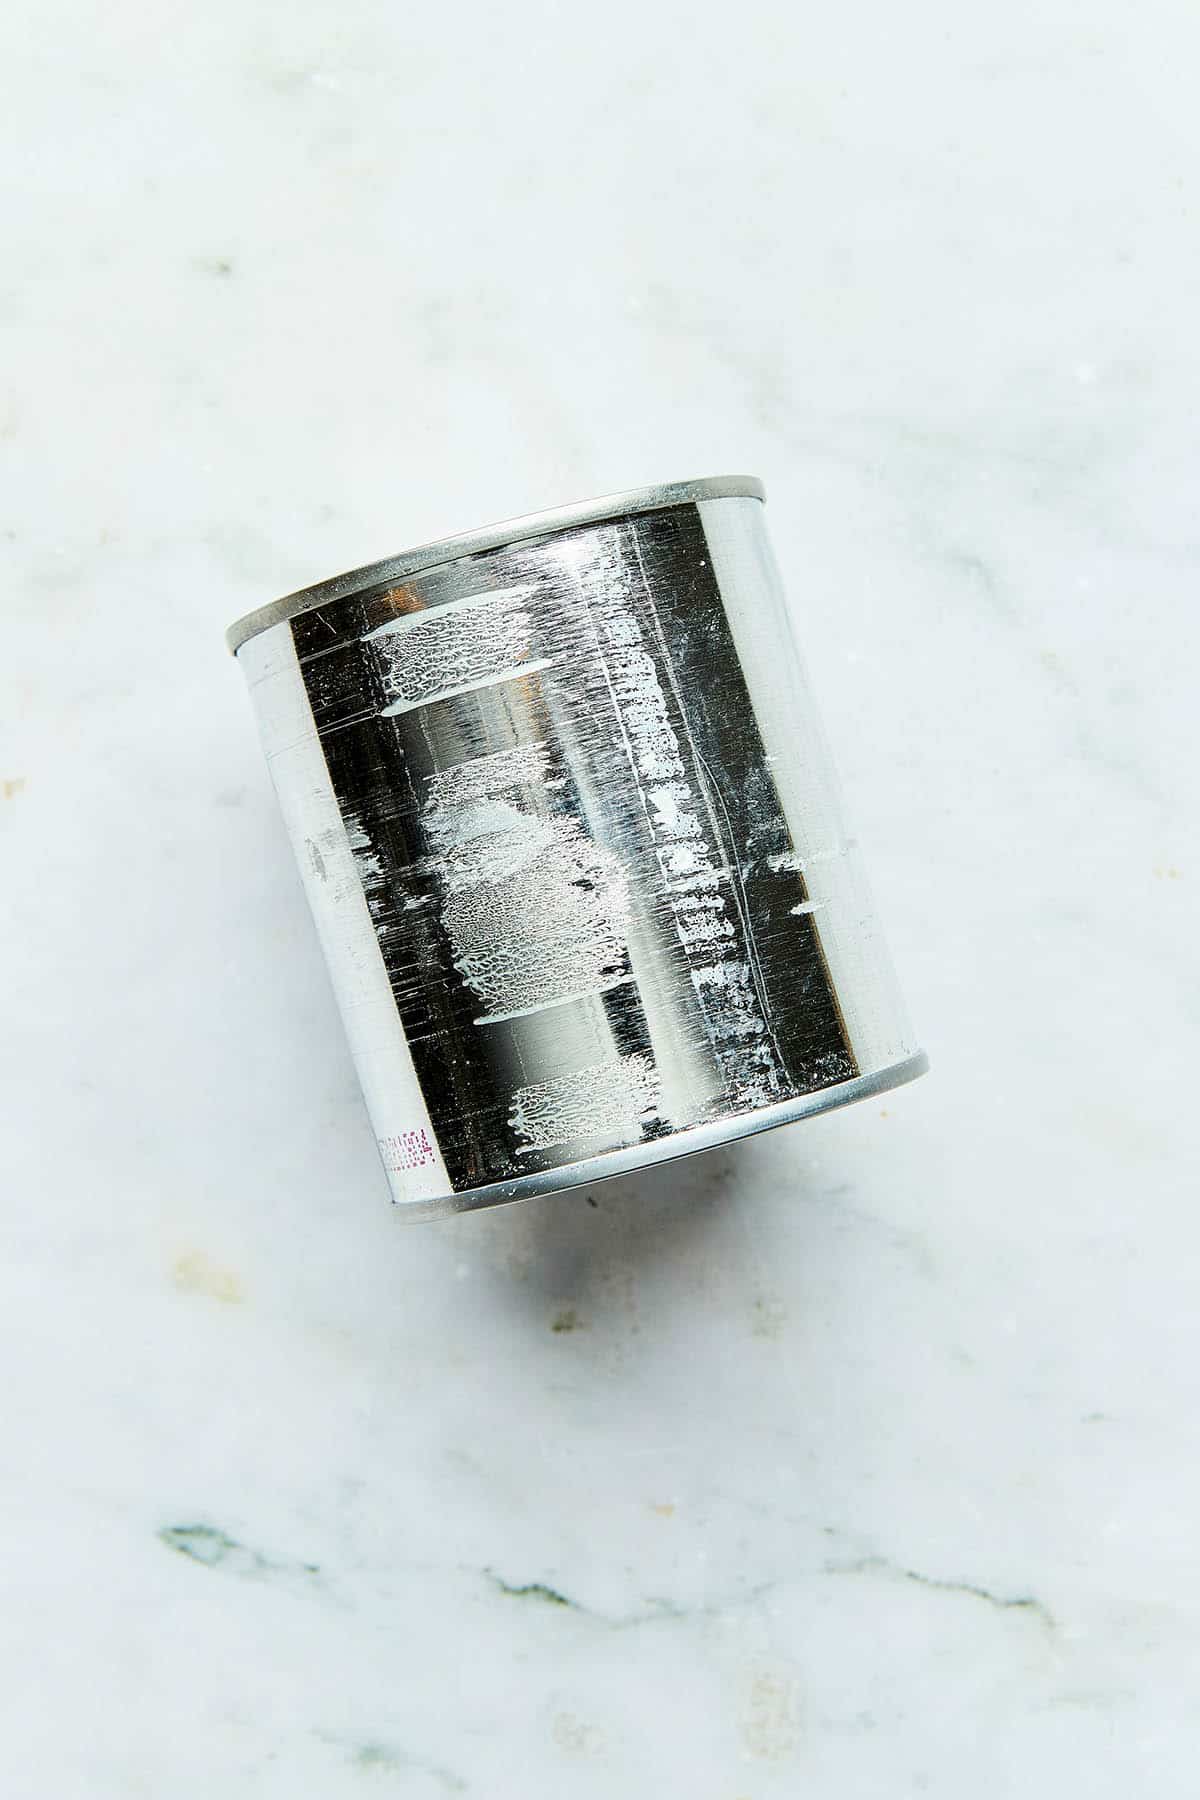 A small can with the label removed laying on a marble counter.